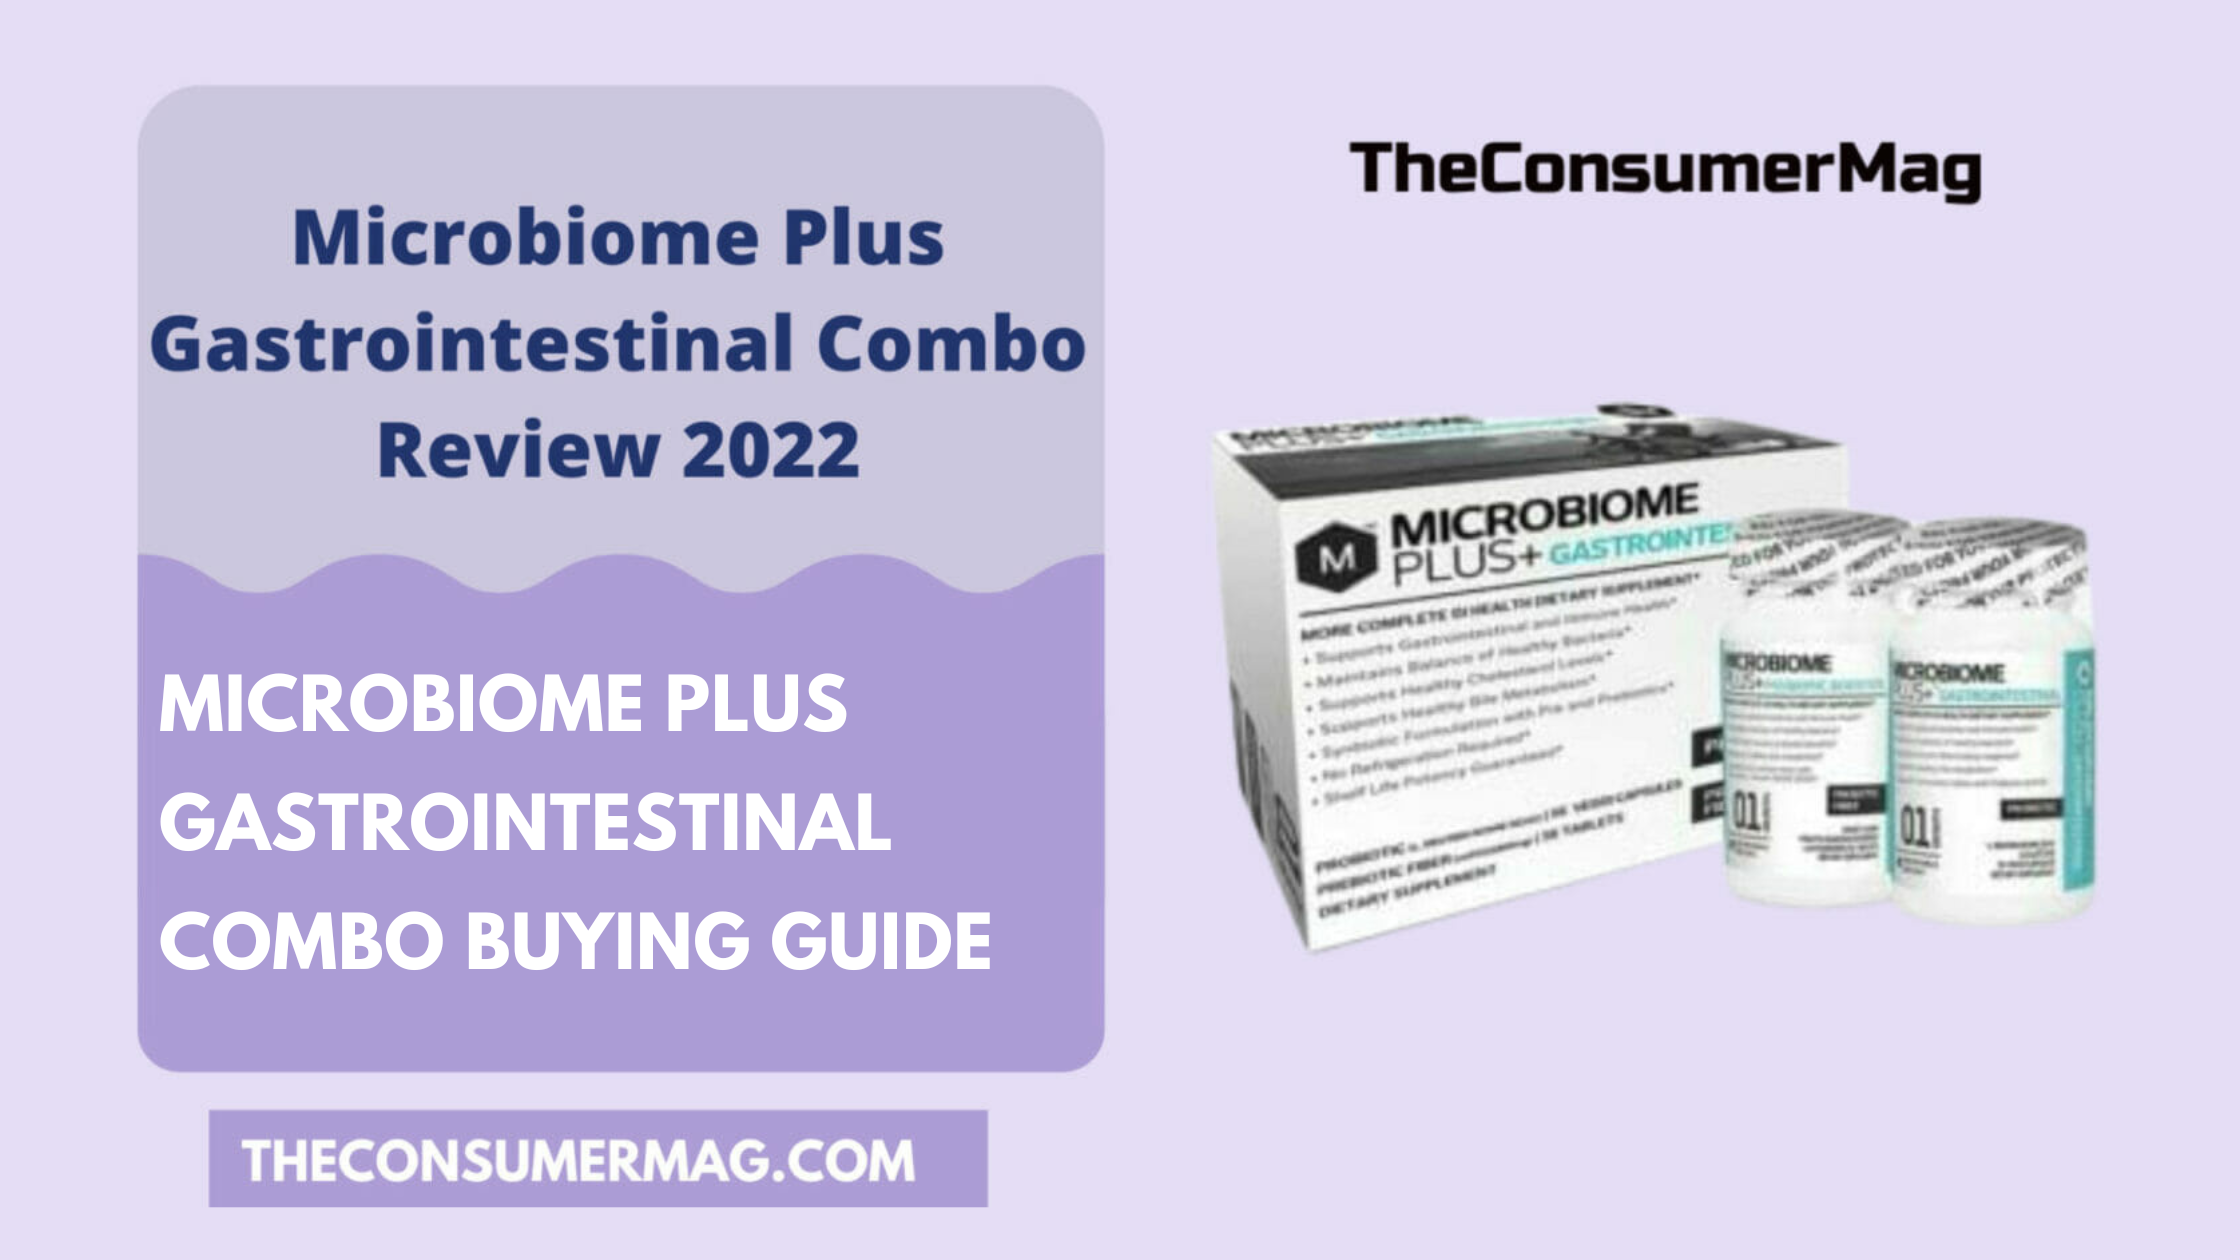 Microbiome Plus Gastrointestinal Combo featured image